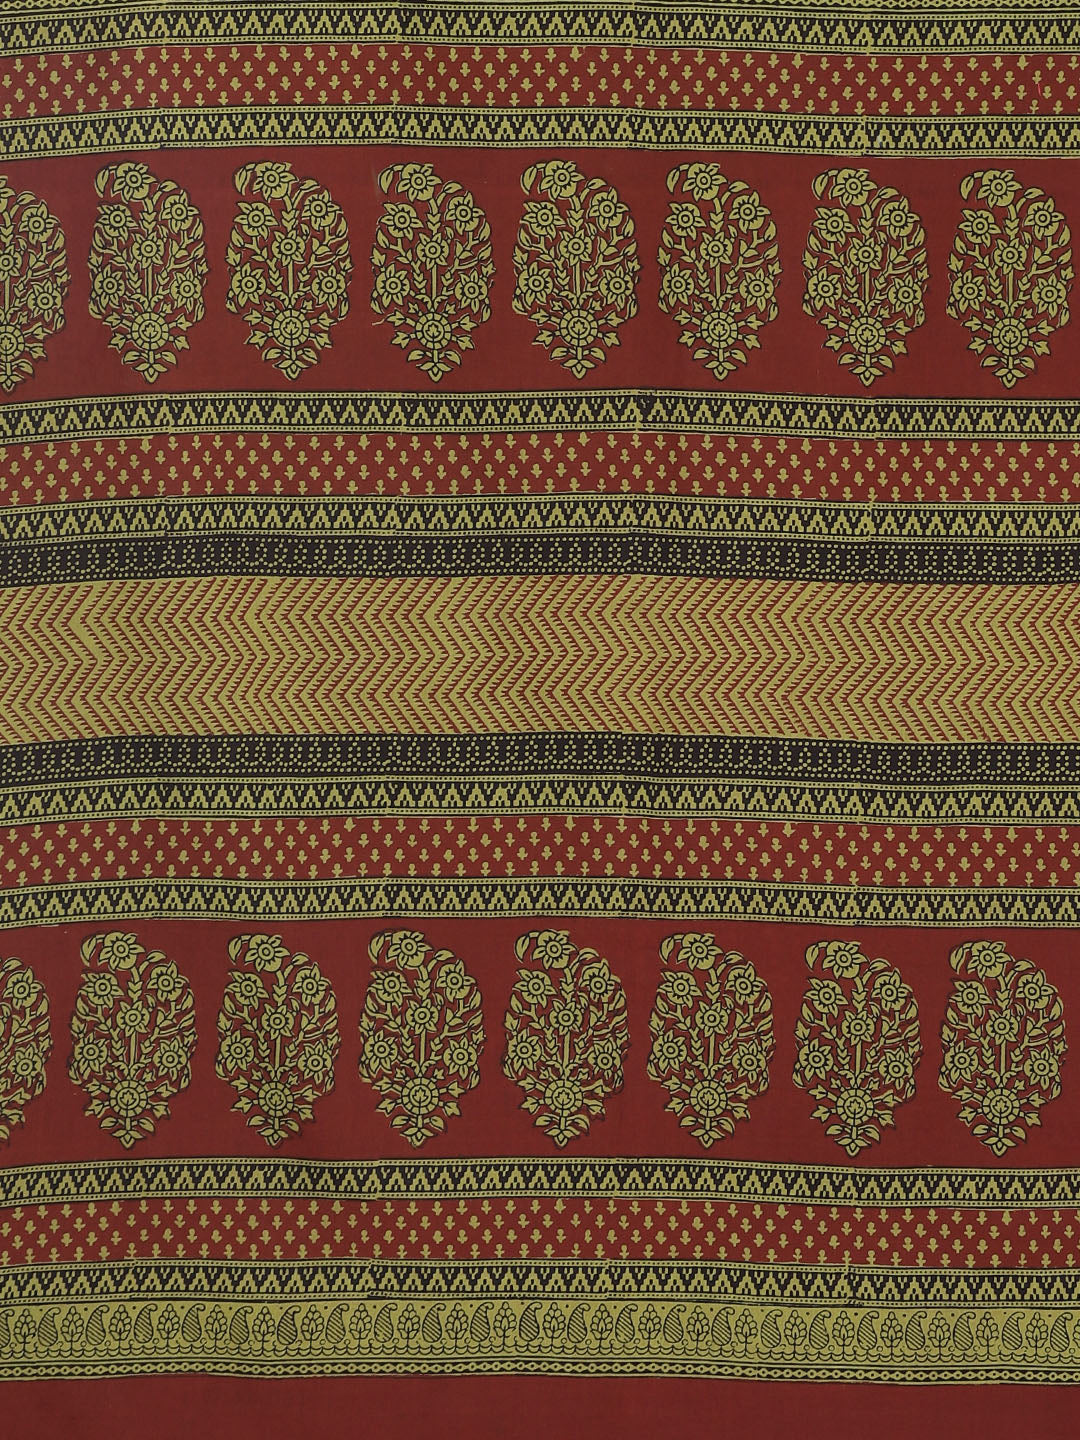 Green and Maroon, Kalakari India Green & Maroon Printed Bagh Saree ZIBASA0103-Saree-Kalakari India-ZIBASA0103-Bagh, Cotton, Geographical Indication, Hand Crafted, Heritage Prints, Natural Dyes, Red, Sarees, Sustainable Fabrics, Woven, Yellow-[Linen,Ethnic,wear,Fashionista,Handloom,Handicraft,Indigo,blockprint,block,print,Cotton,Chanderi,Blue, latest,classy,party,bollywood,trendy,summer,style,traditional,formal,elegant,unique,style,hand,block,print, dabu,booti,gift,present,glamorous,affordable,co